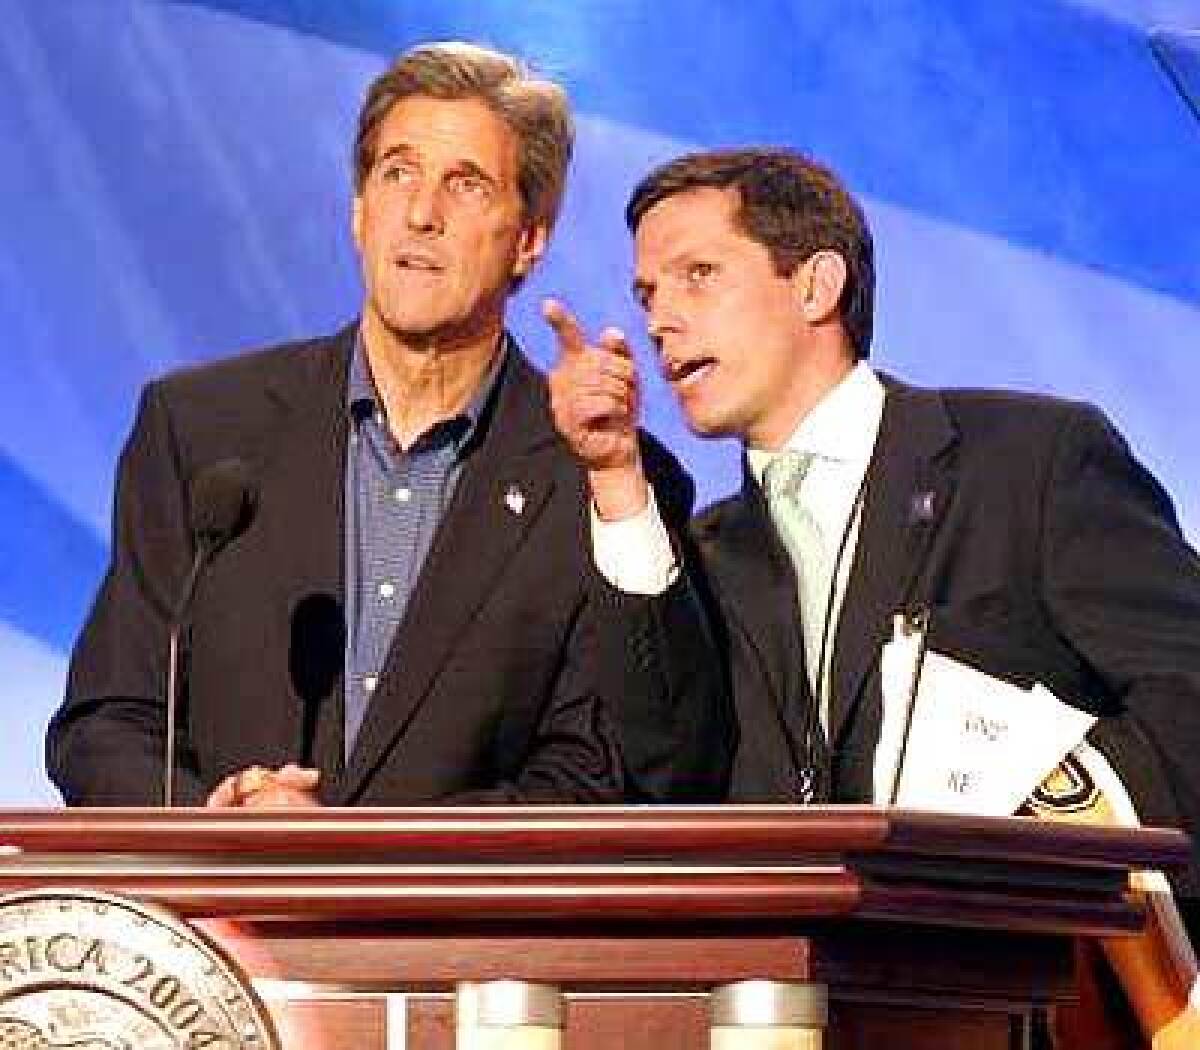 John Kerry and an aide check out the stage ahead of the candidate's big speech.